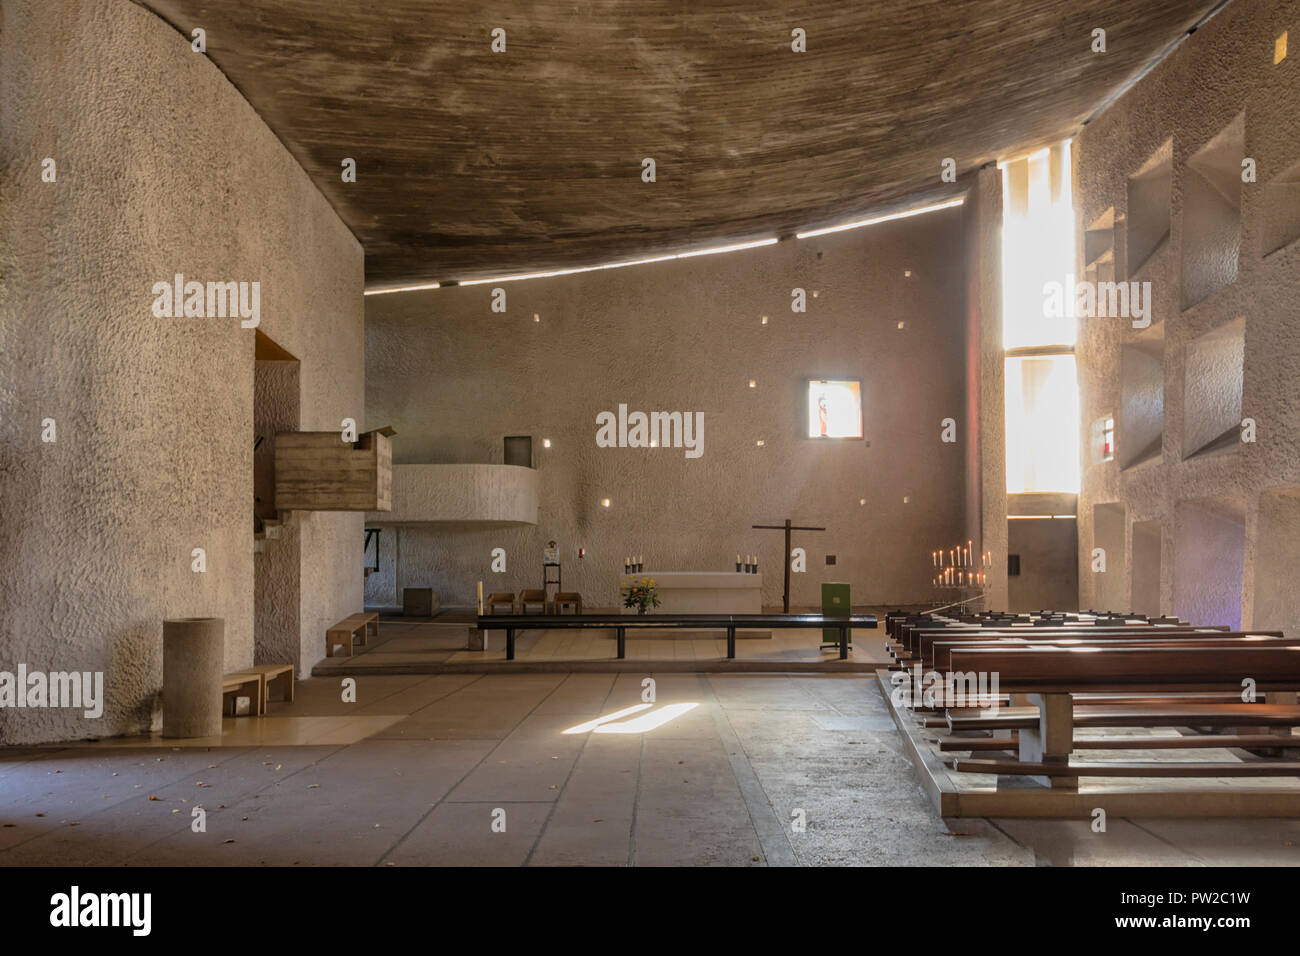 Interior view of Notre-Dame du Haut, chapel at Ronchamp, France, by architect Le Corbusier, finished in 1955. Stock Photo